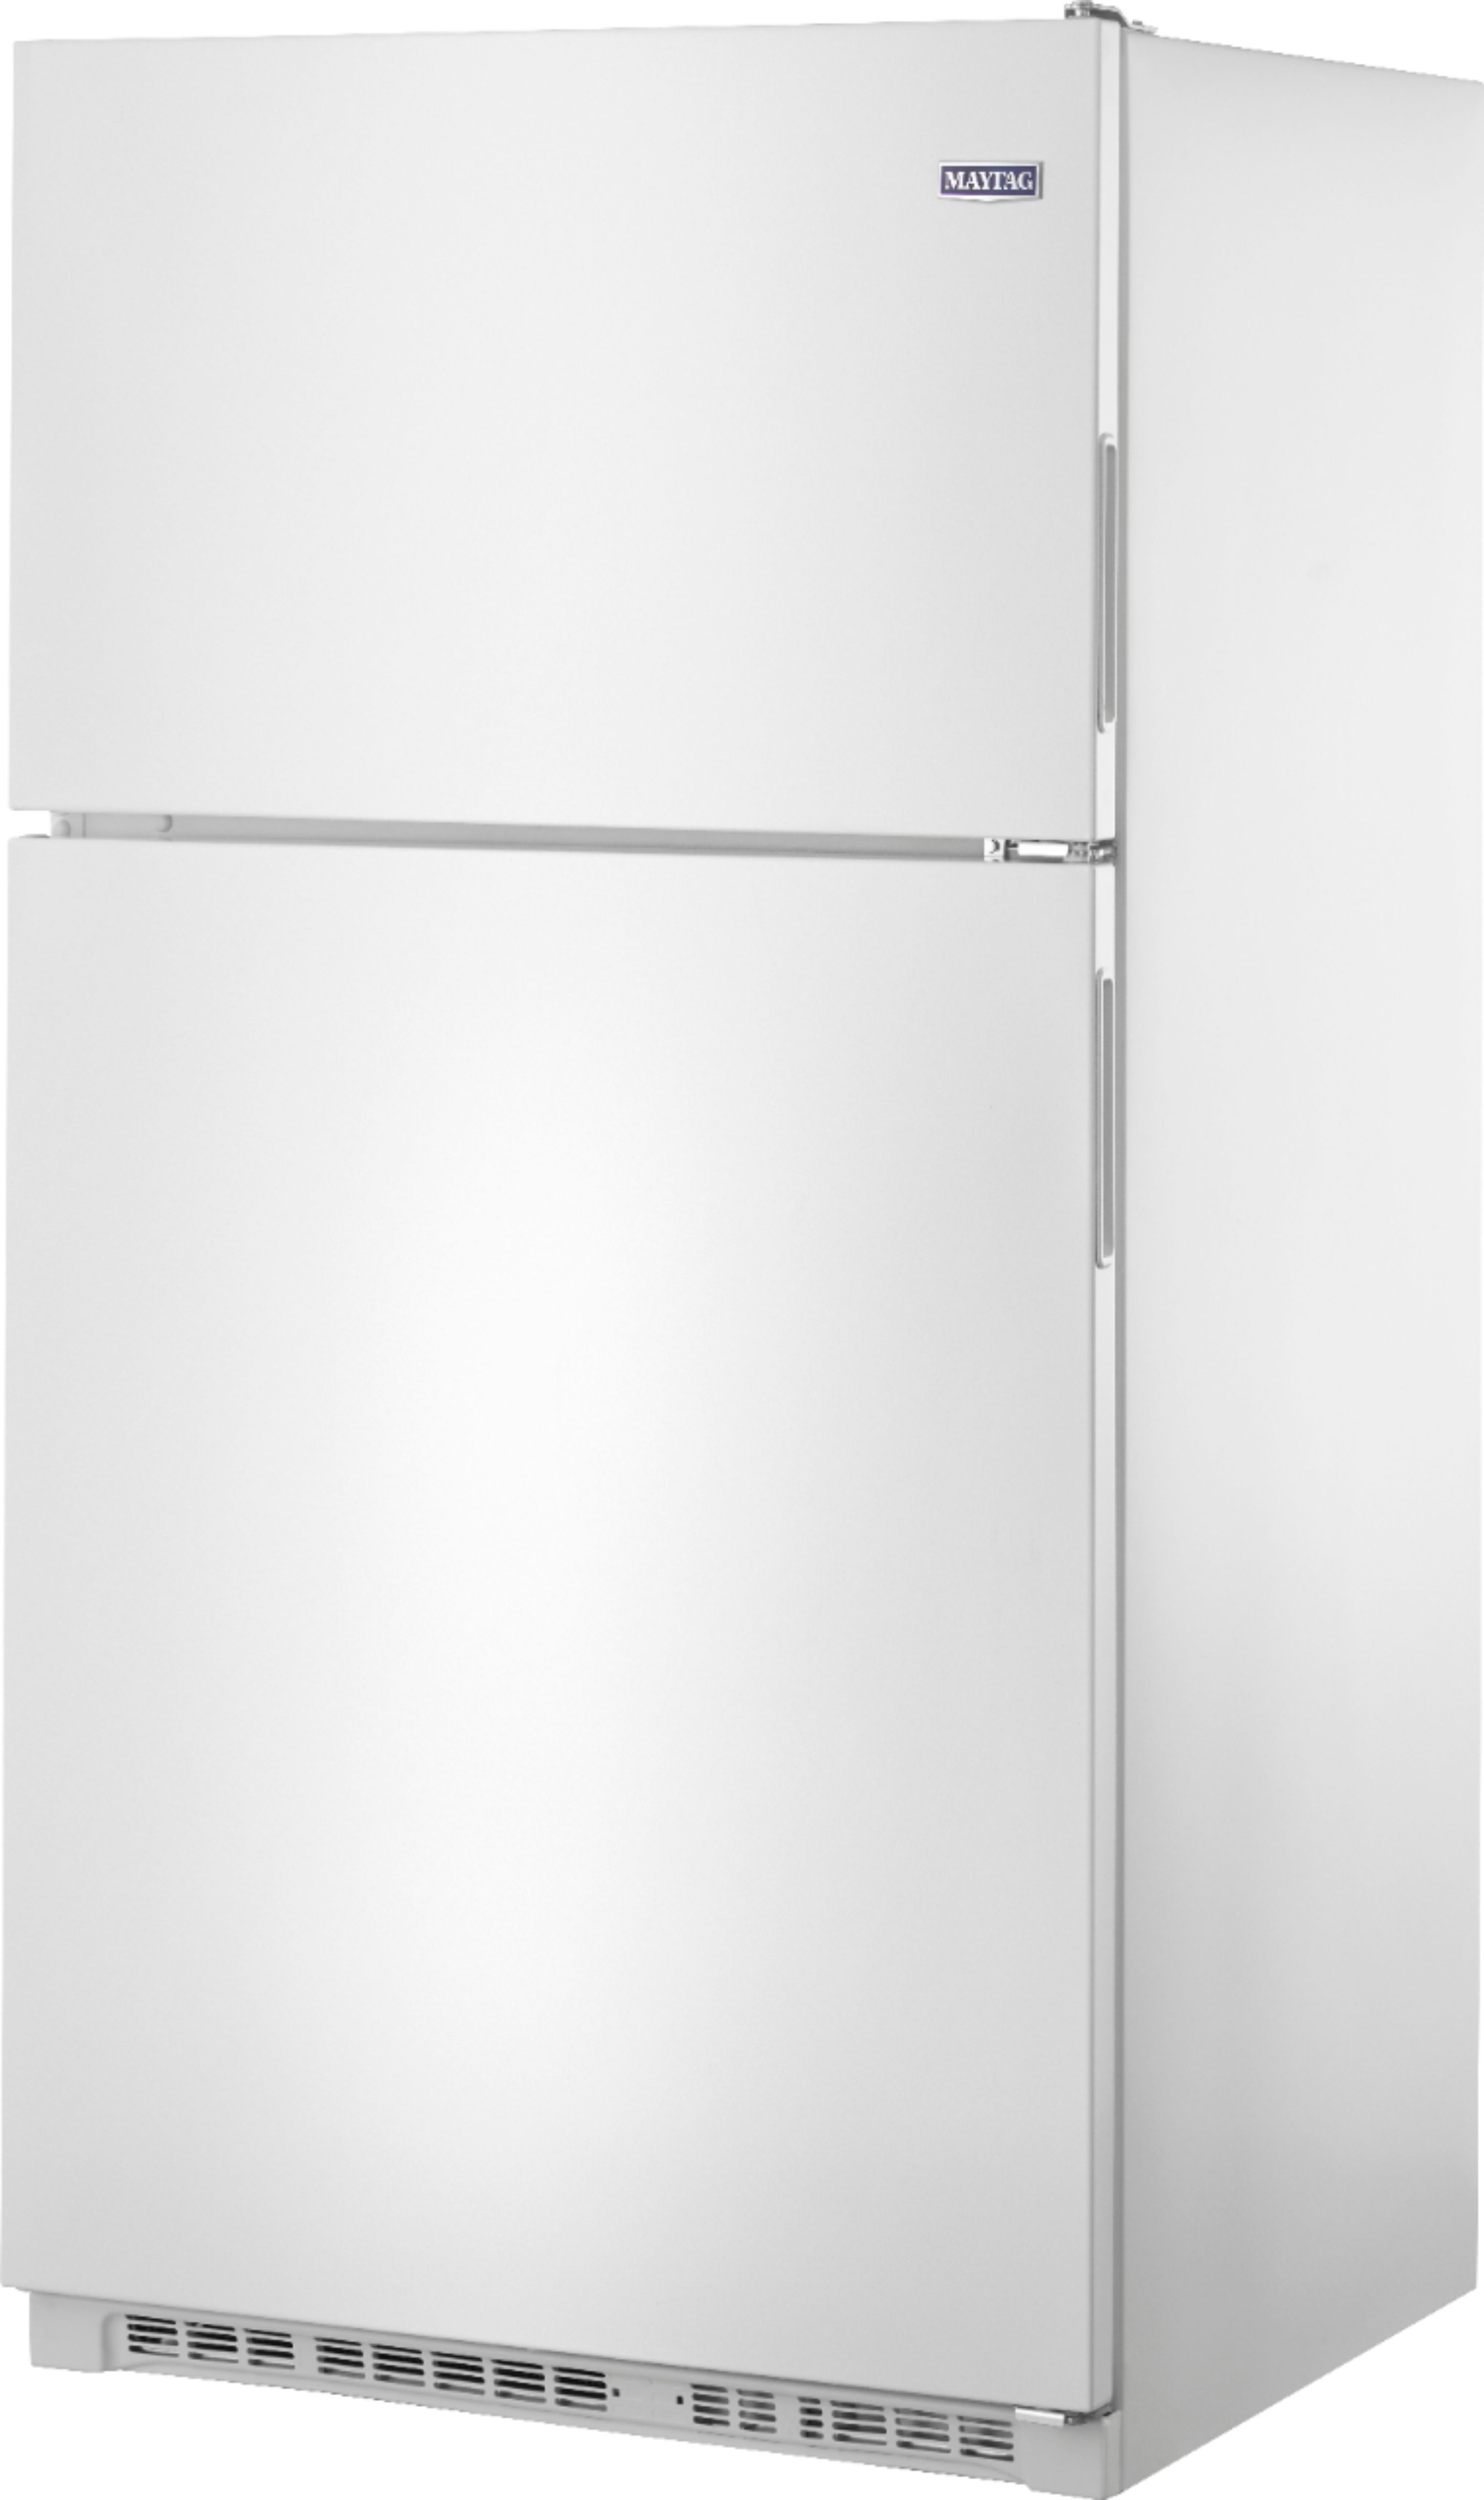 Left View: Maytag - 20.5 Cu. Ft. Top-Freezer Refrigerator - Monochromatic stainless steel